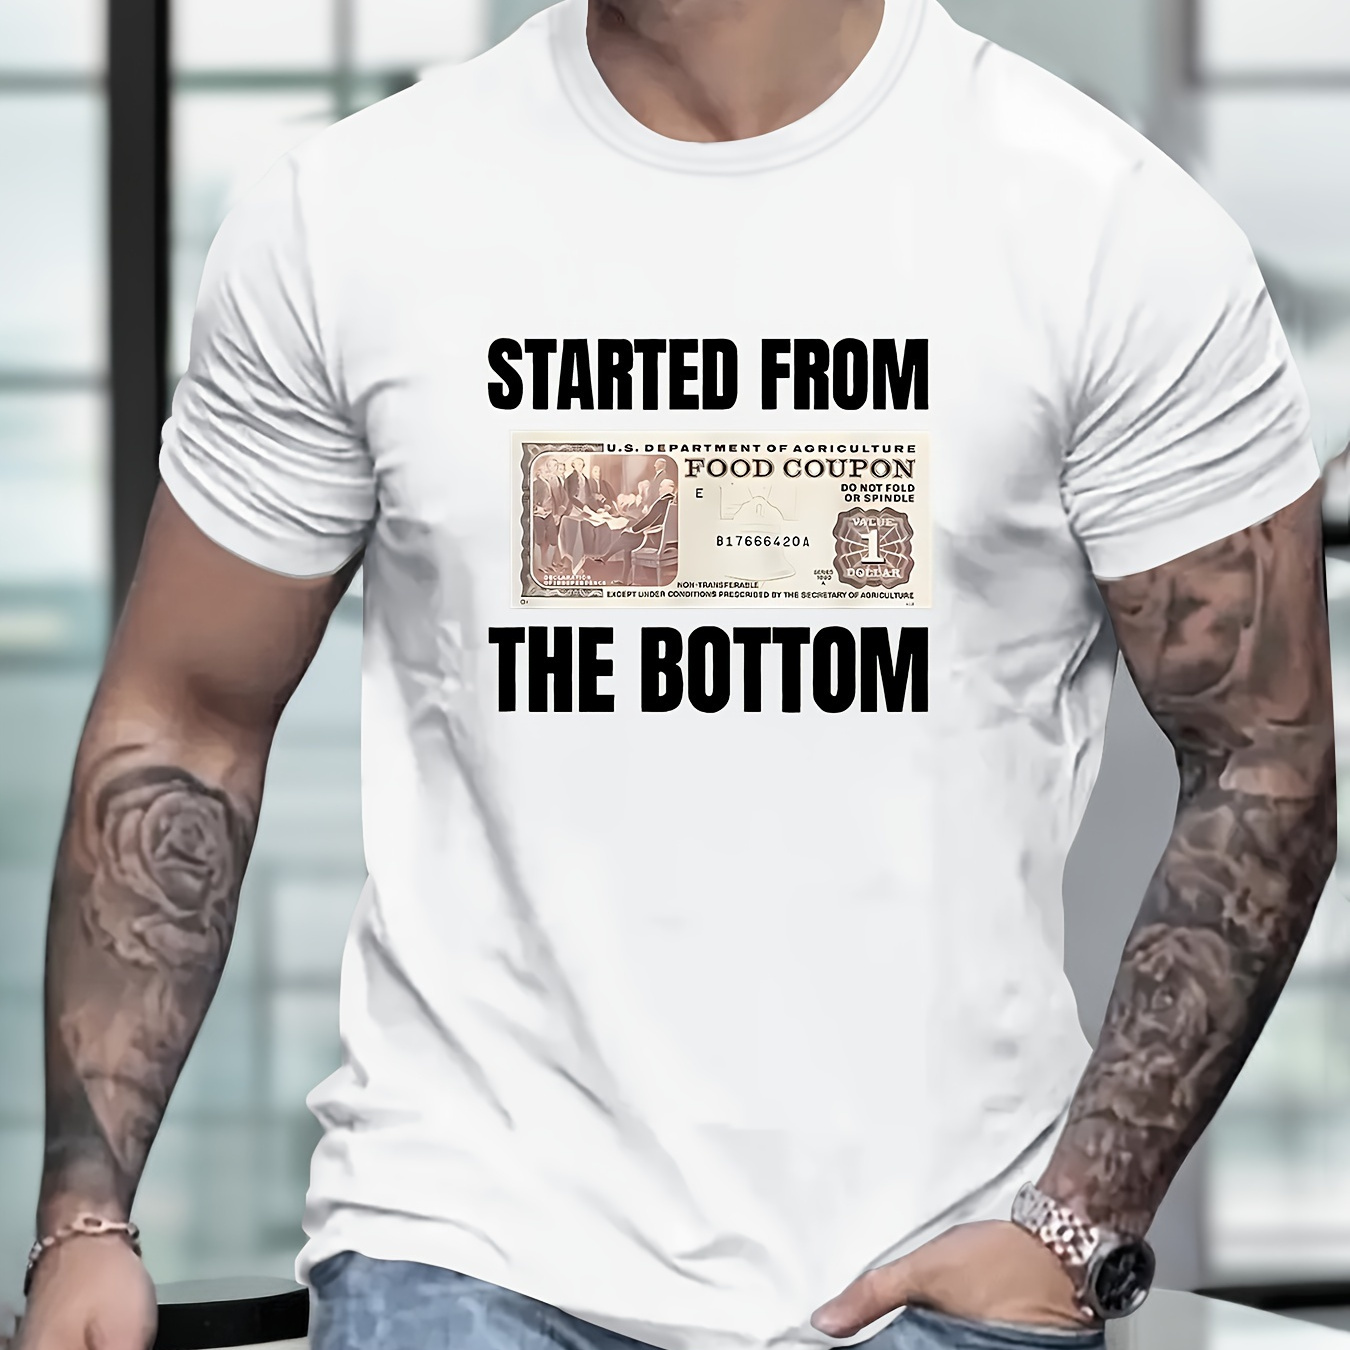 

Start From The Bottom And Ticket Graphic Print, Men's Casual Fit T-shirt, Cool Tee Top Clothes For Men For Summer For Everyday Activities